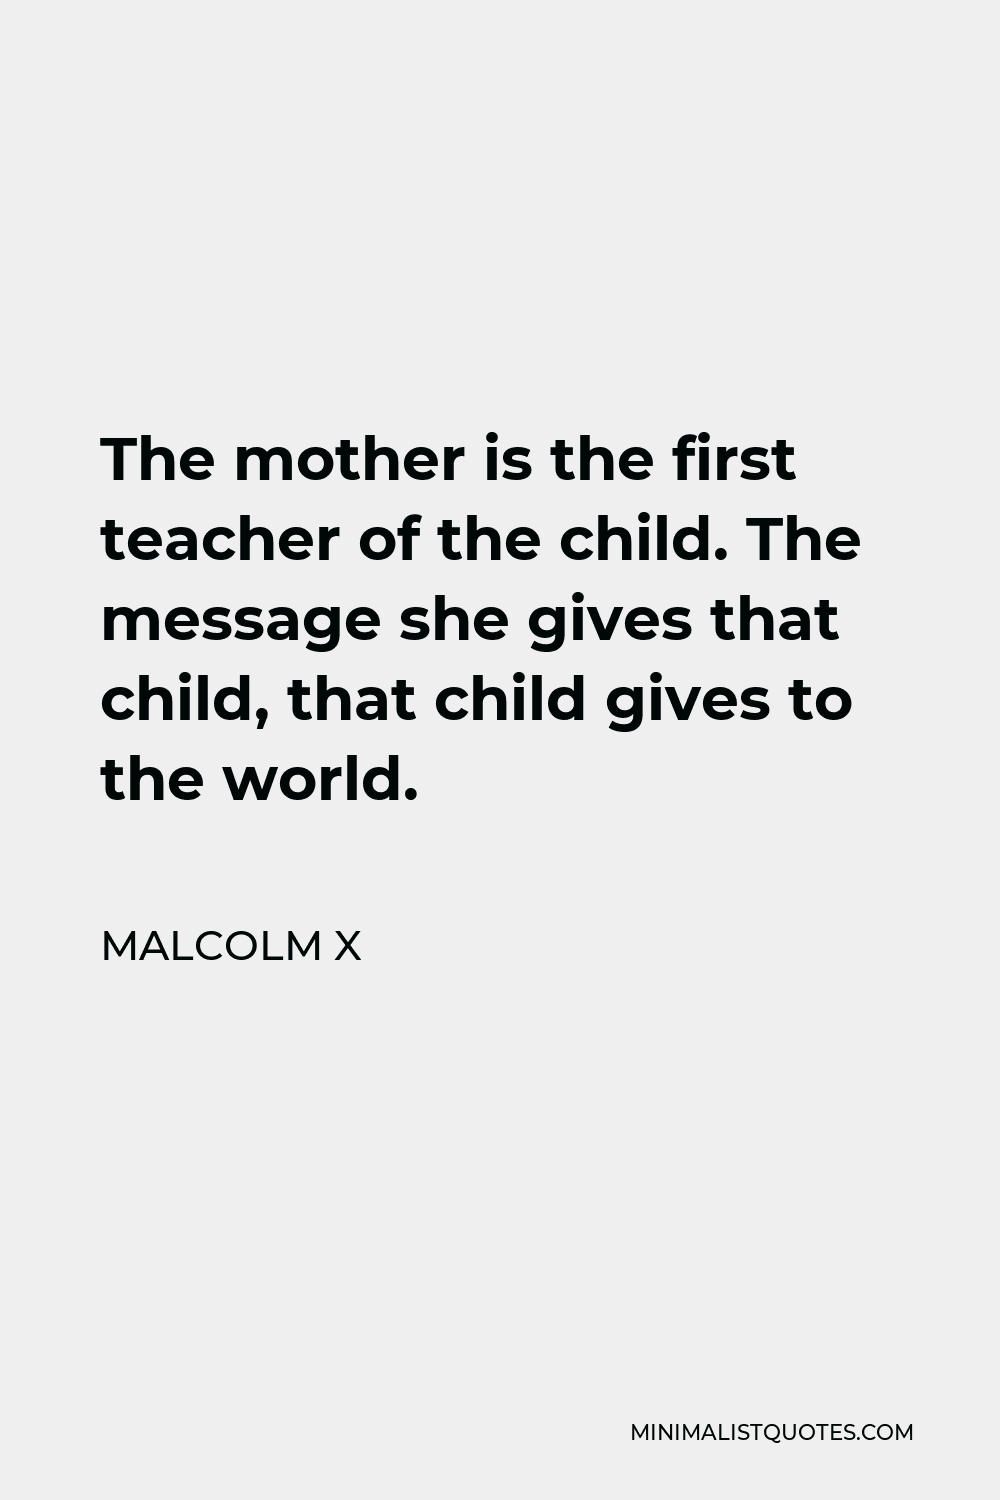 Malcolm X Quote - The mother is the first teacher of the child. The message she gives that child, that child gives to the world.